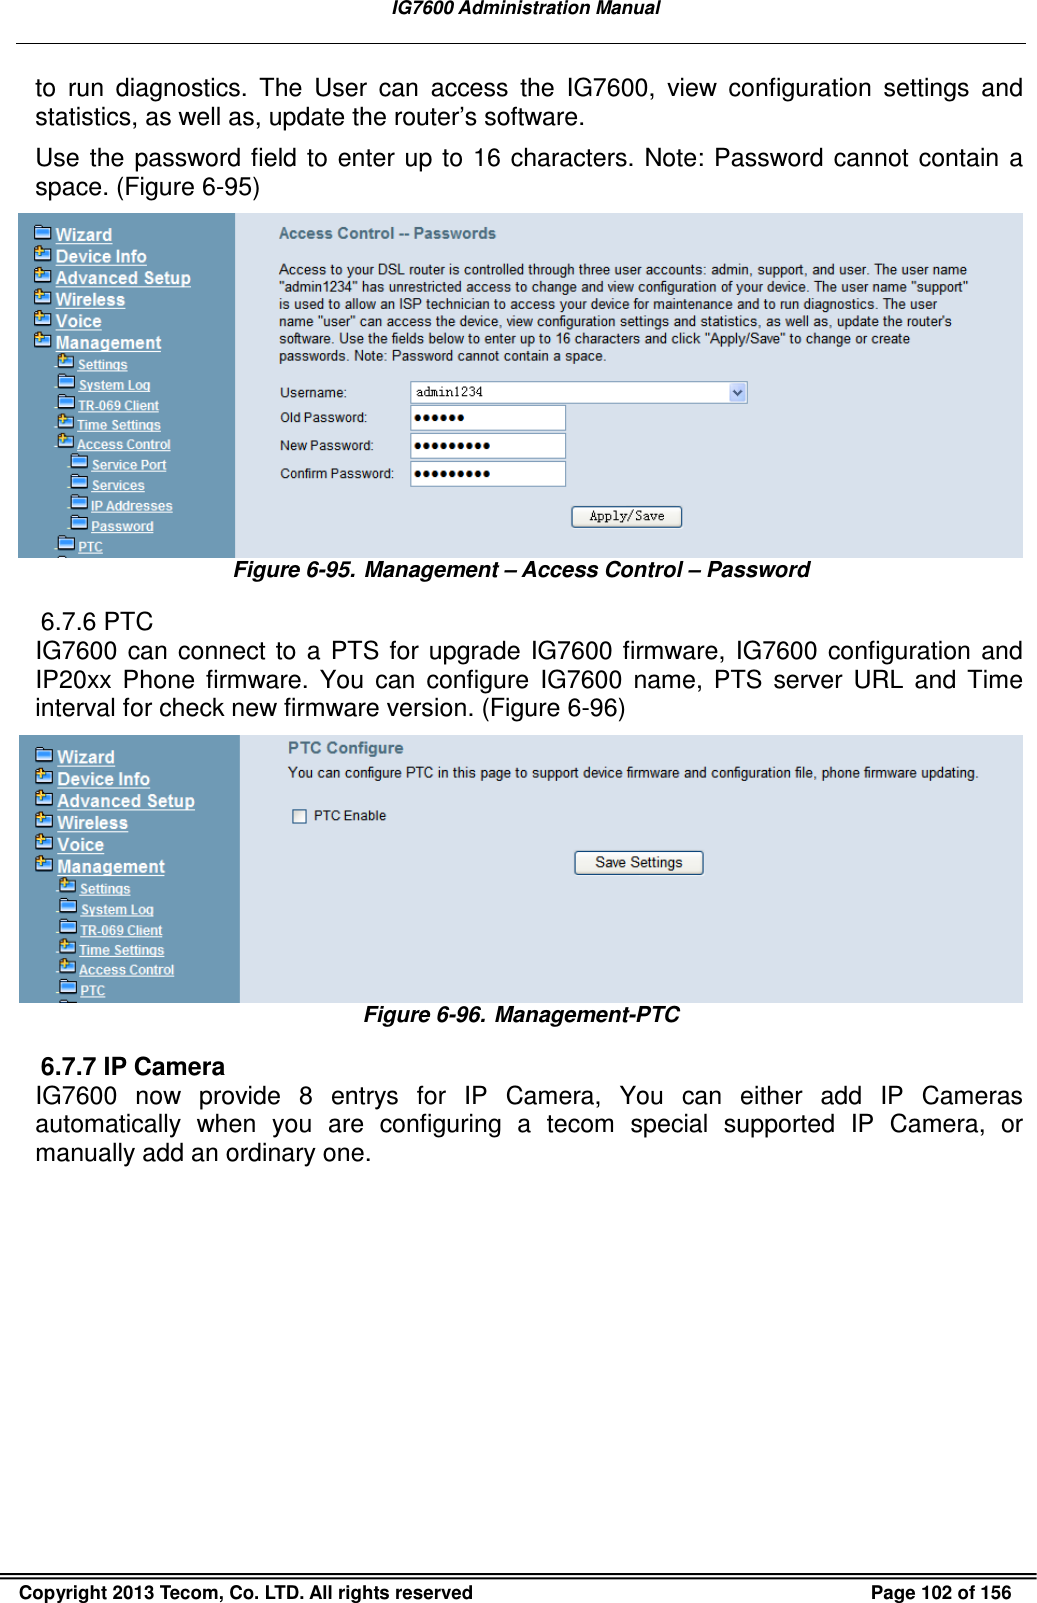   IG7600 Administration Manual  Copyright 2013 Tecom, Co. LTD. All rights reserved  Page 102 of 156 to  run  diagnostics.  The  User  can  access  the  IG7600,  view  configuration  settings  and statistics, as well as, update the router’s software.   Use  the  password field  to  enter  up  to  16  characters.  Note:  Password cannot contain  a space. (Figure 6-95)  Figure 6-95. Management – Access Control – Password 6.7.6 PTC IG7600  can  connect  to  a  PTS  for  upgrade  IG7600  firmware,  IG7600  configuration  and IP20xx  Phone  firmware.  You  can  configure  IG7600  name,  PTS  server  URL  and  Time interval for check new firmware version. (Figure 6-96)  Figure 6-96. Management-PTC 6.7.7 IP Camera IG7600  now  provide  8  entrys  for  IP  Camera,  You  can  either  add  IP  Cameras automatically  when  you  are  configuring  a  tecom  special  supported  IP  Camera,  or manually add an ordinary one. 